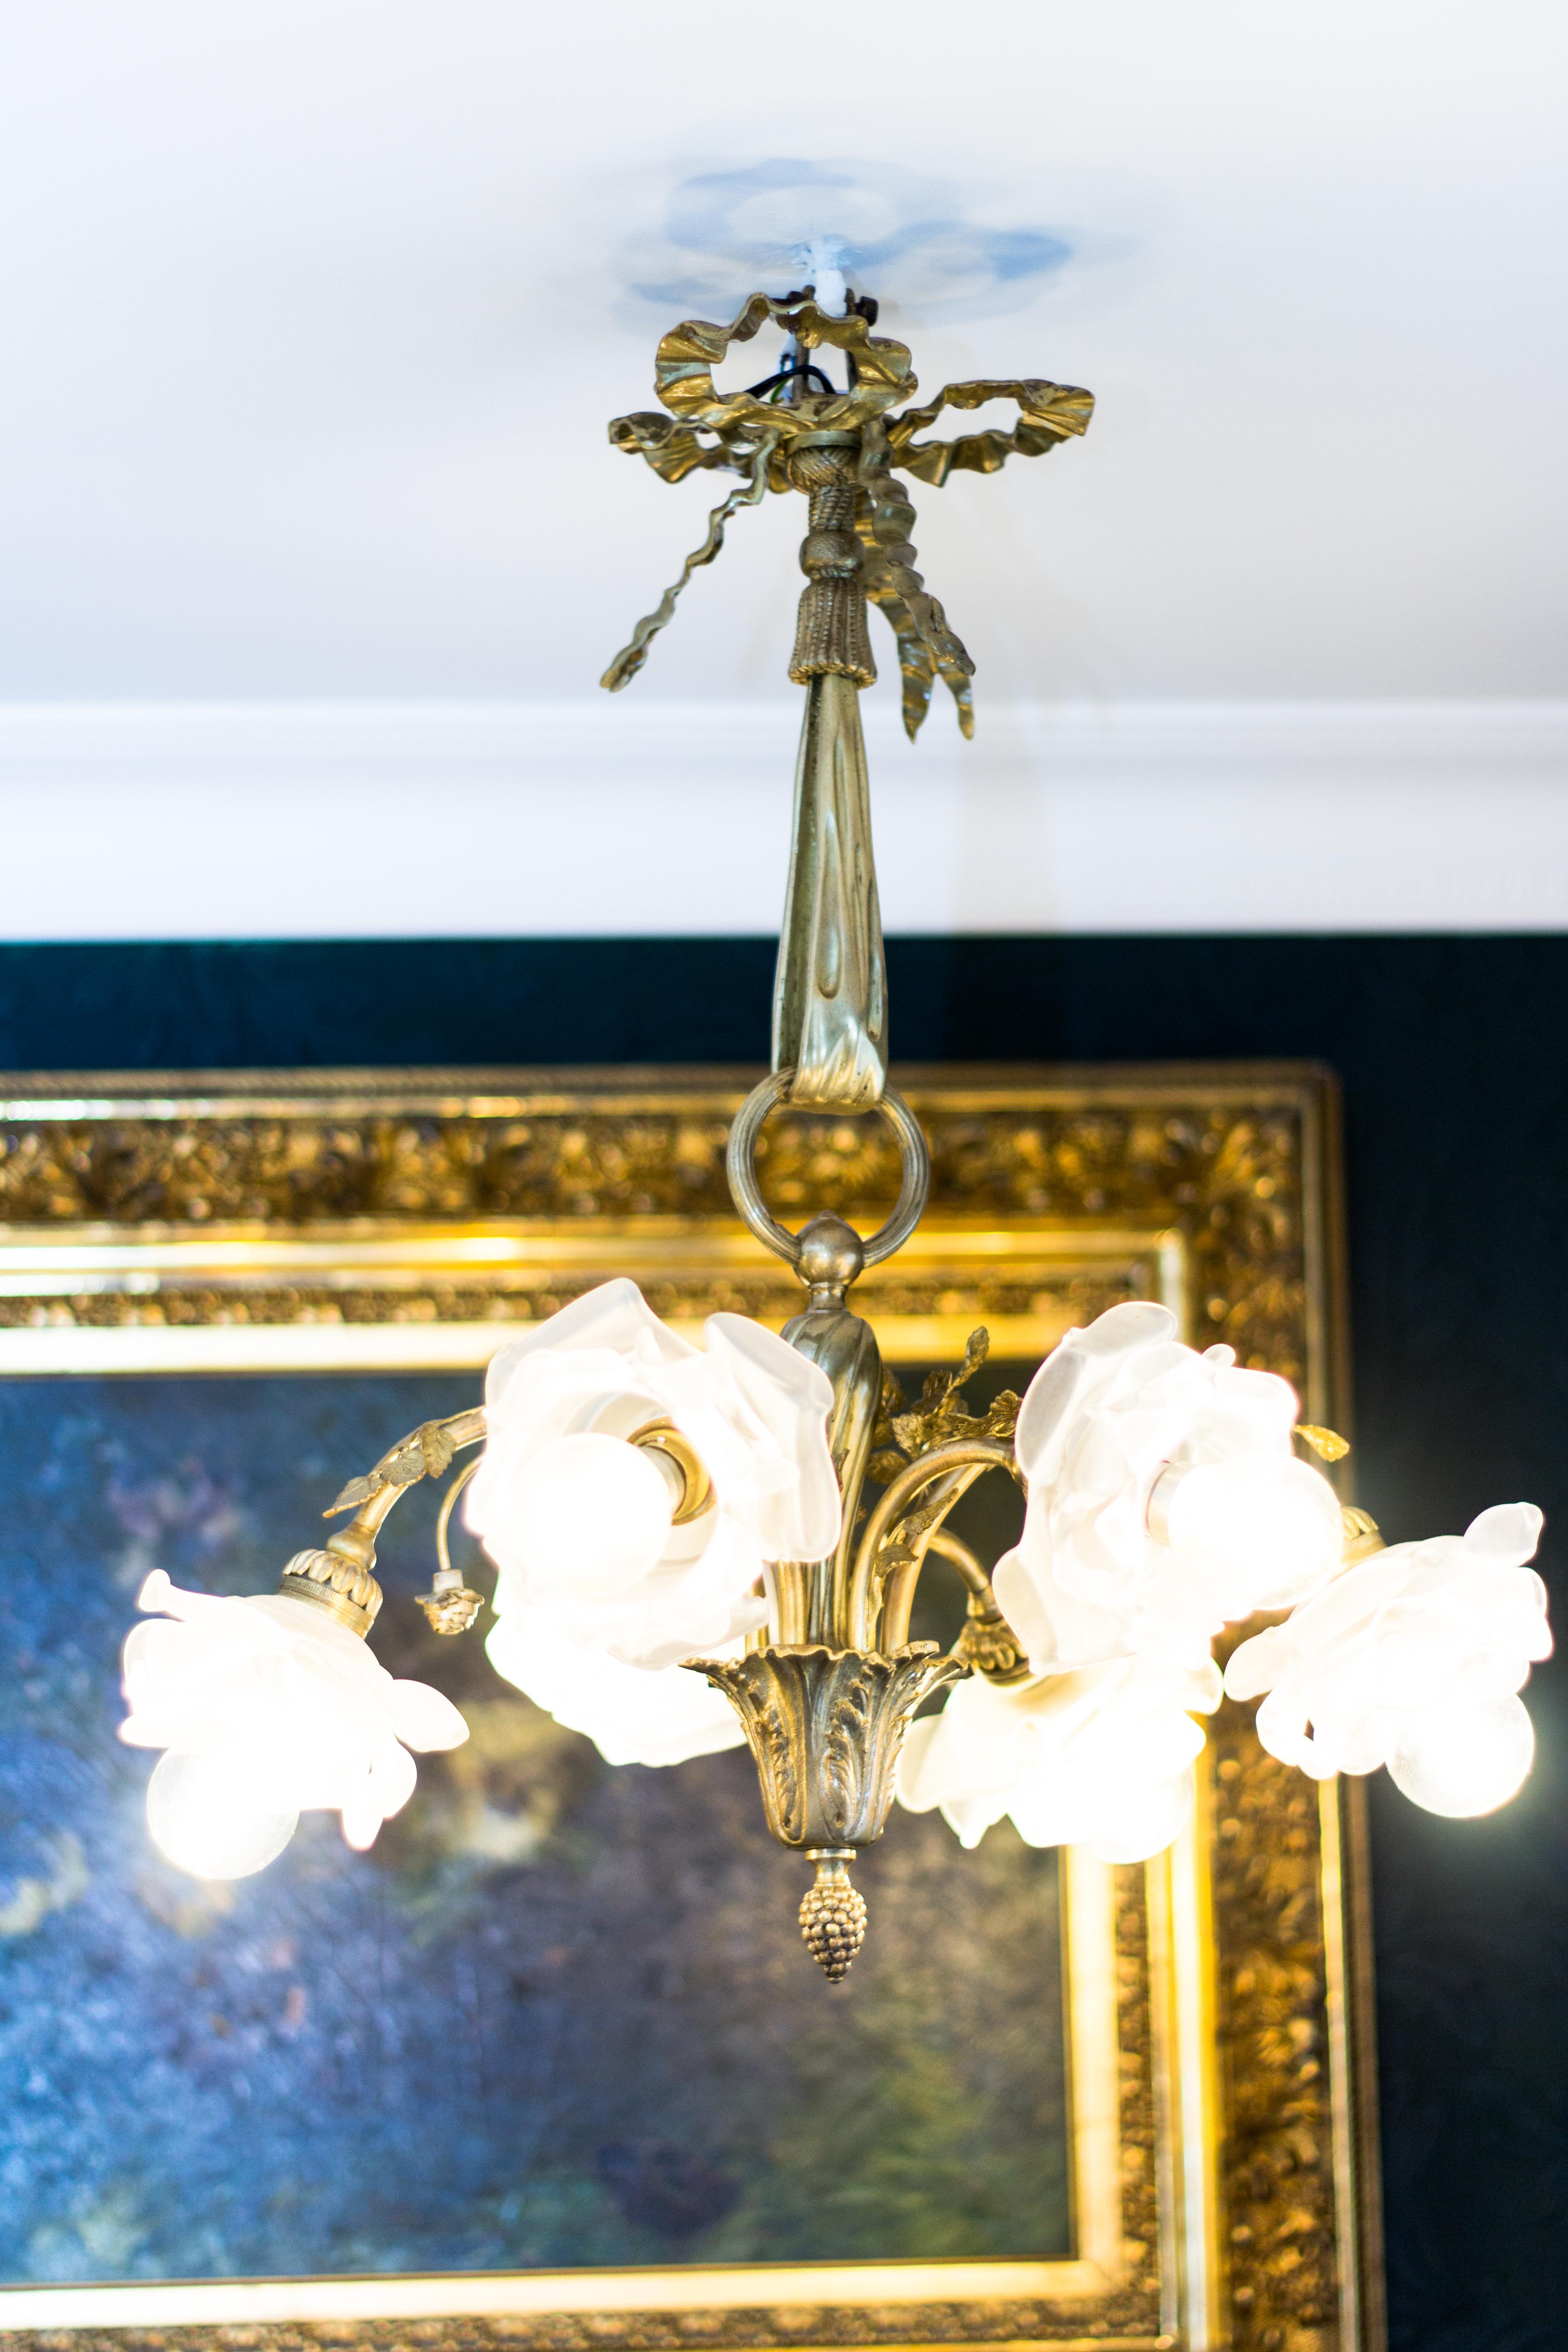 Beautiful Louis XVI style gilt bronze chandelier from the 1920s, six arms with floral shaped frosted glass shades, decorated with cast bronze roses. Six-light chandelier with six B22 sockets, new wiring.
Measures: Height is 20.5 inches / 52 cm,